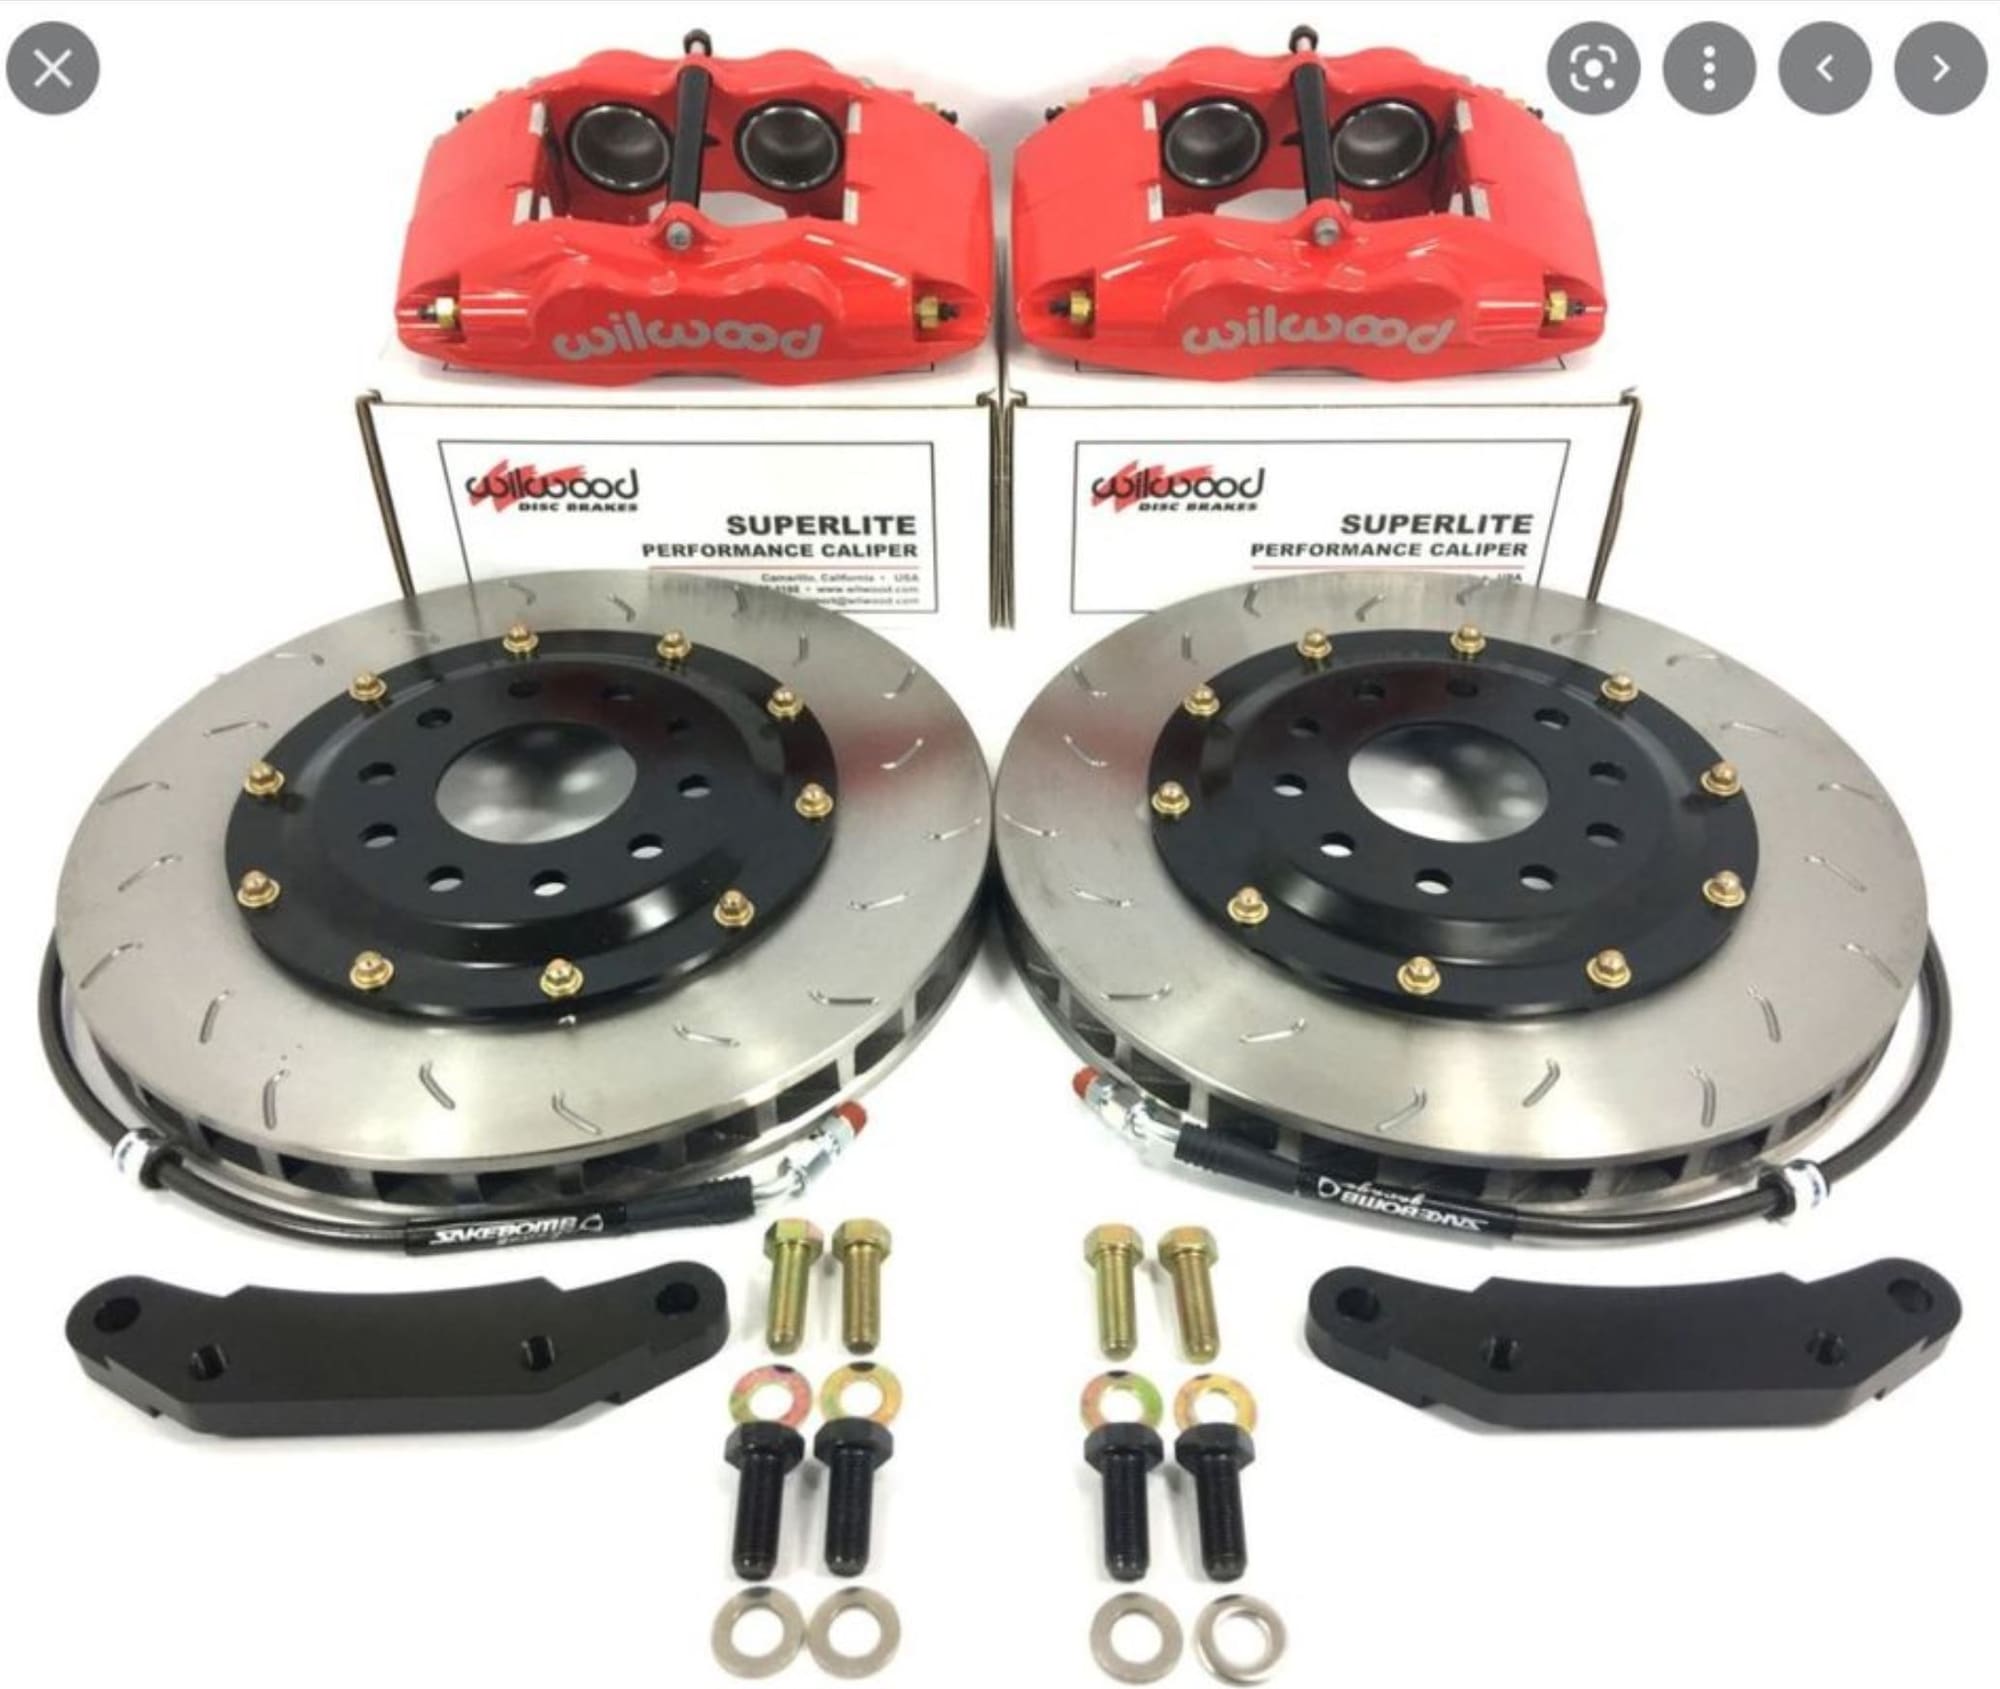 Brakes - Brand New BBK by Sakebomb Garage Front and Rear - New - 1993 to 1995 Mazda RX-7 - Miami, FL 33126, United States